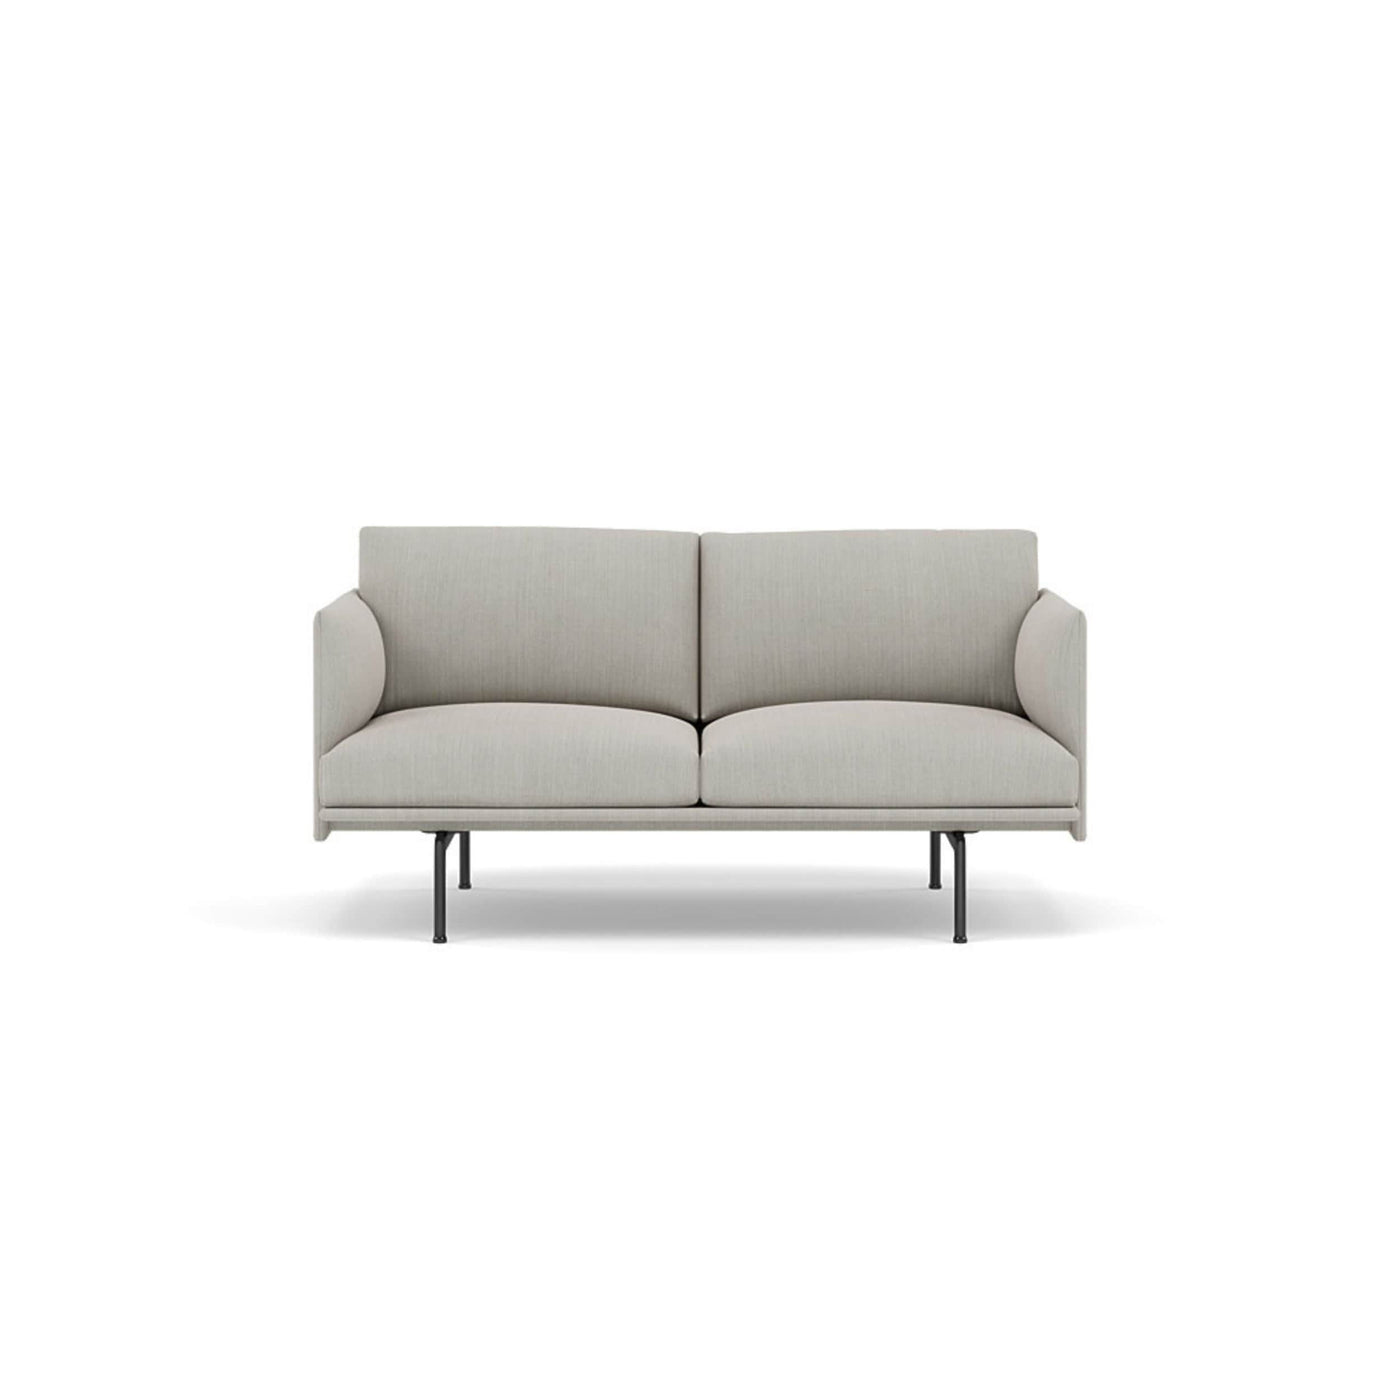 Muuto Outline Studio Sofa 140 black legs. Made to order from someday designs. #colour_fiord-201